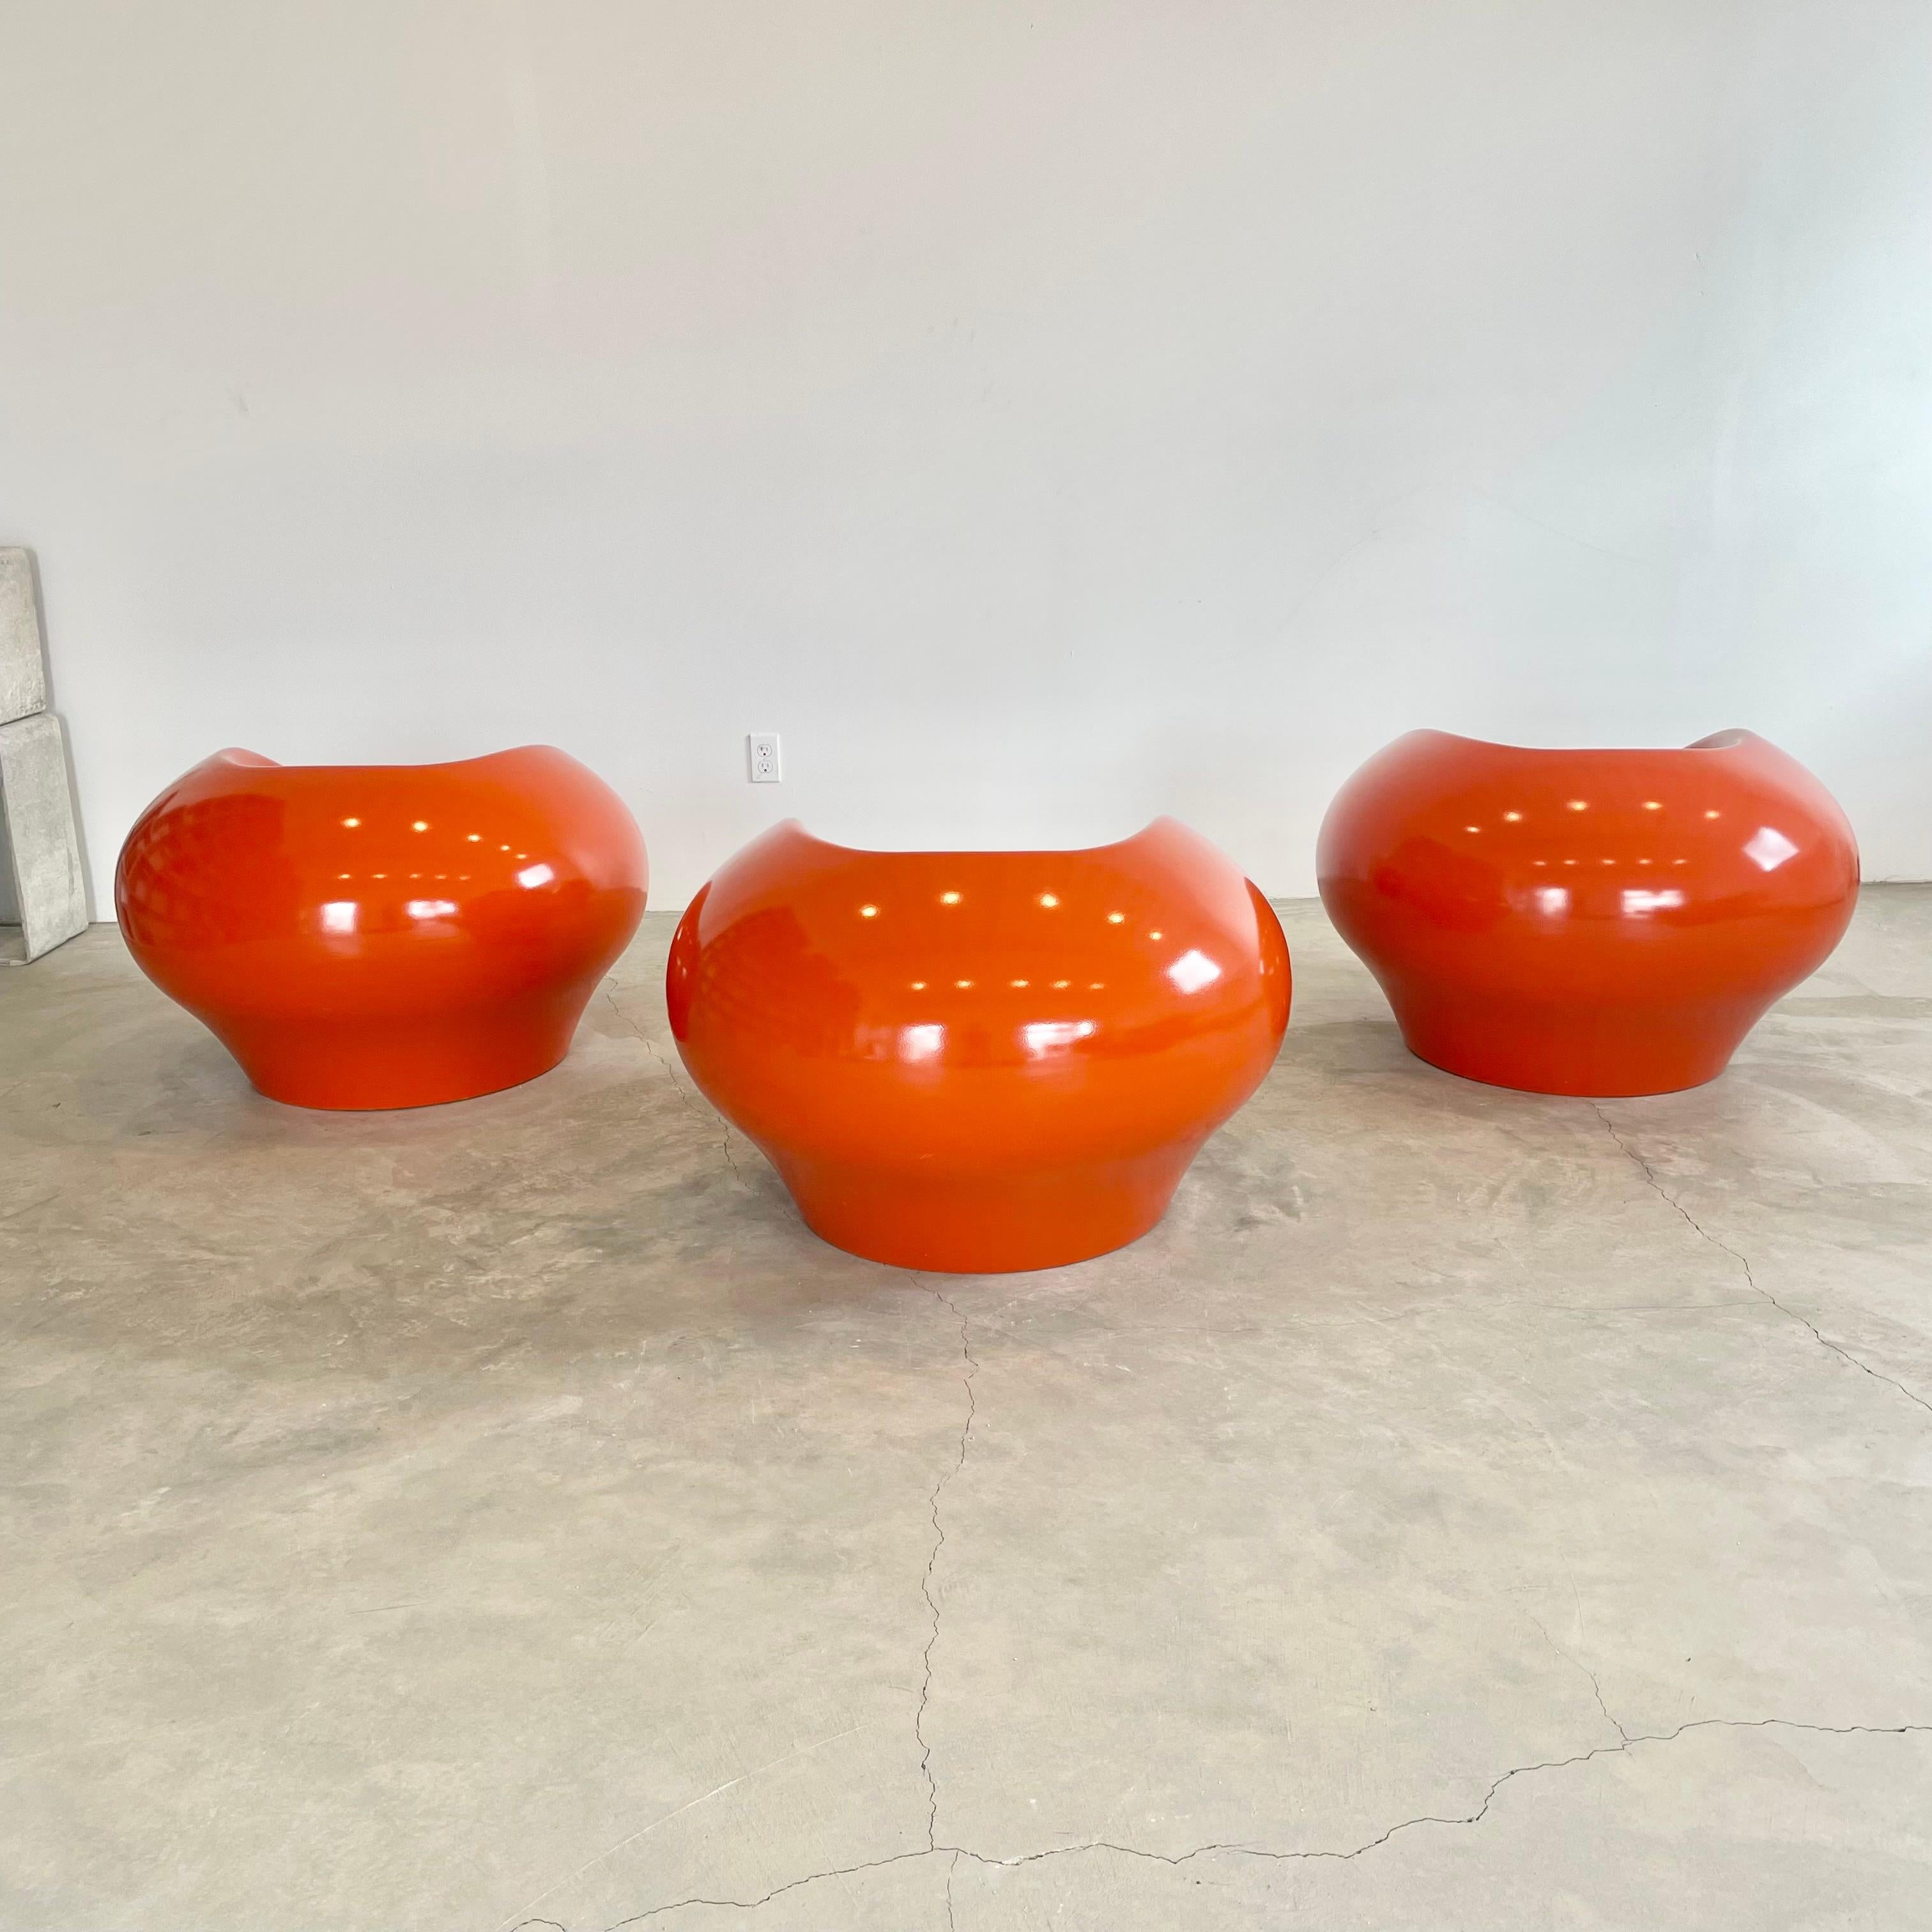 Late 20th Century Set of 3 Prototype Fiberglass Chairs in the Style of Eero Aarnio, 1970s, Finland For Sale